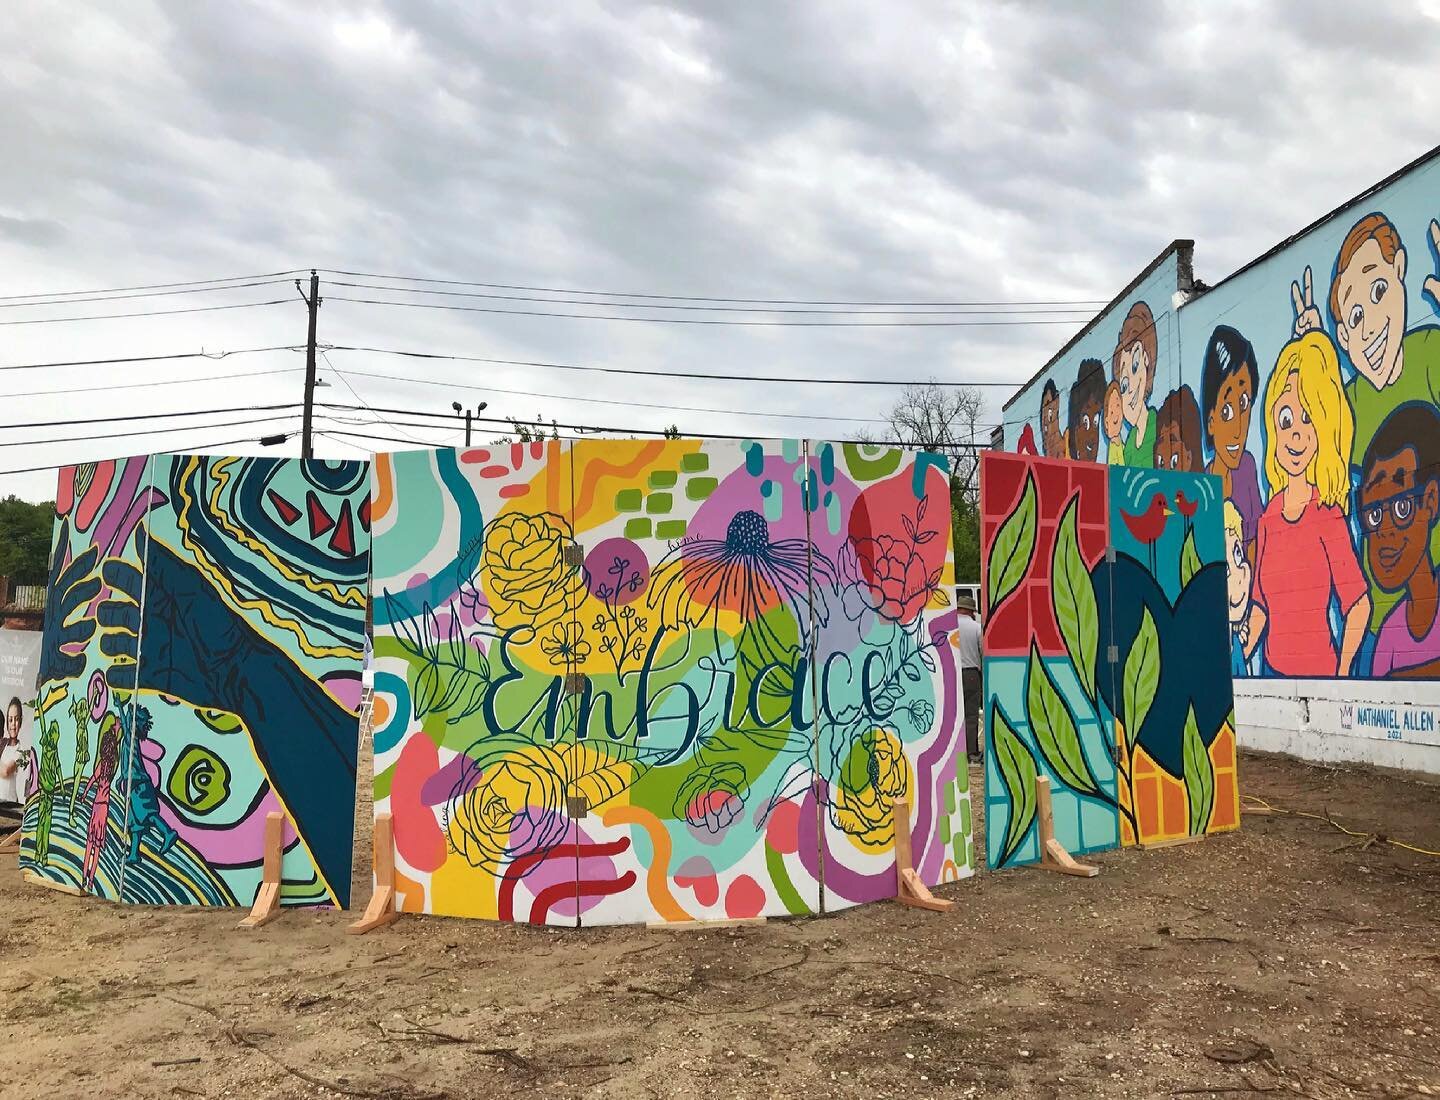 There are a total of SEVEN murals for @embracealkids ! @blankspacebham 
Left @kmkirkart
Middle @cahaburn 
Right @marygracetracy 
The Mobile, Birmingham, and Tuscaloosa community murals are on the other side (swipe for a screen recording of @embraceal